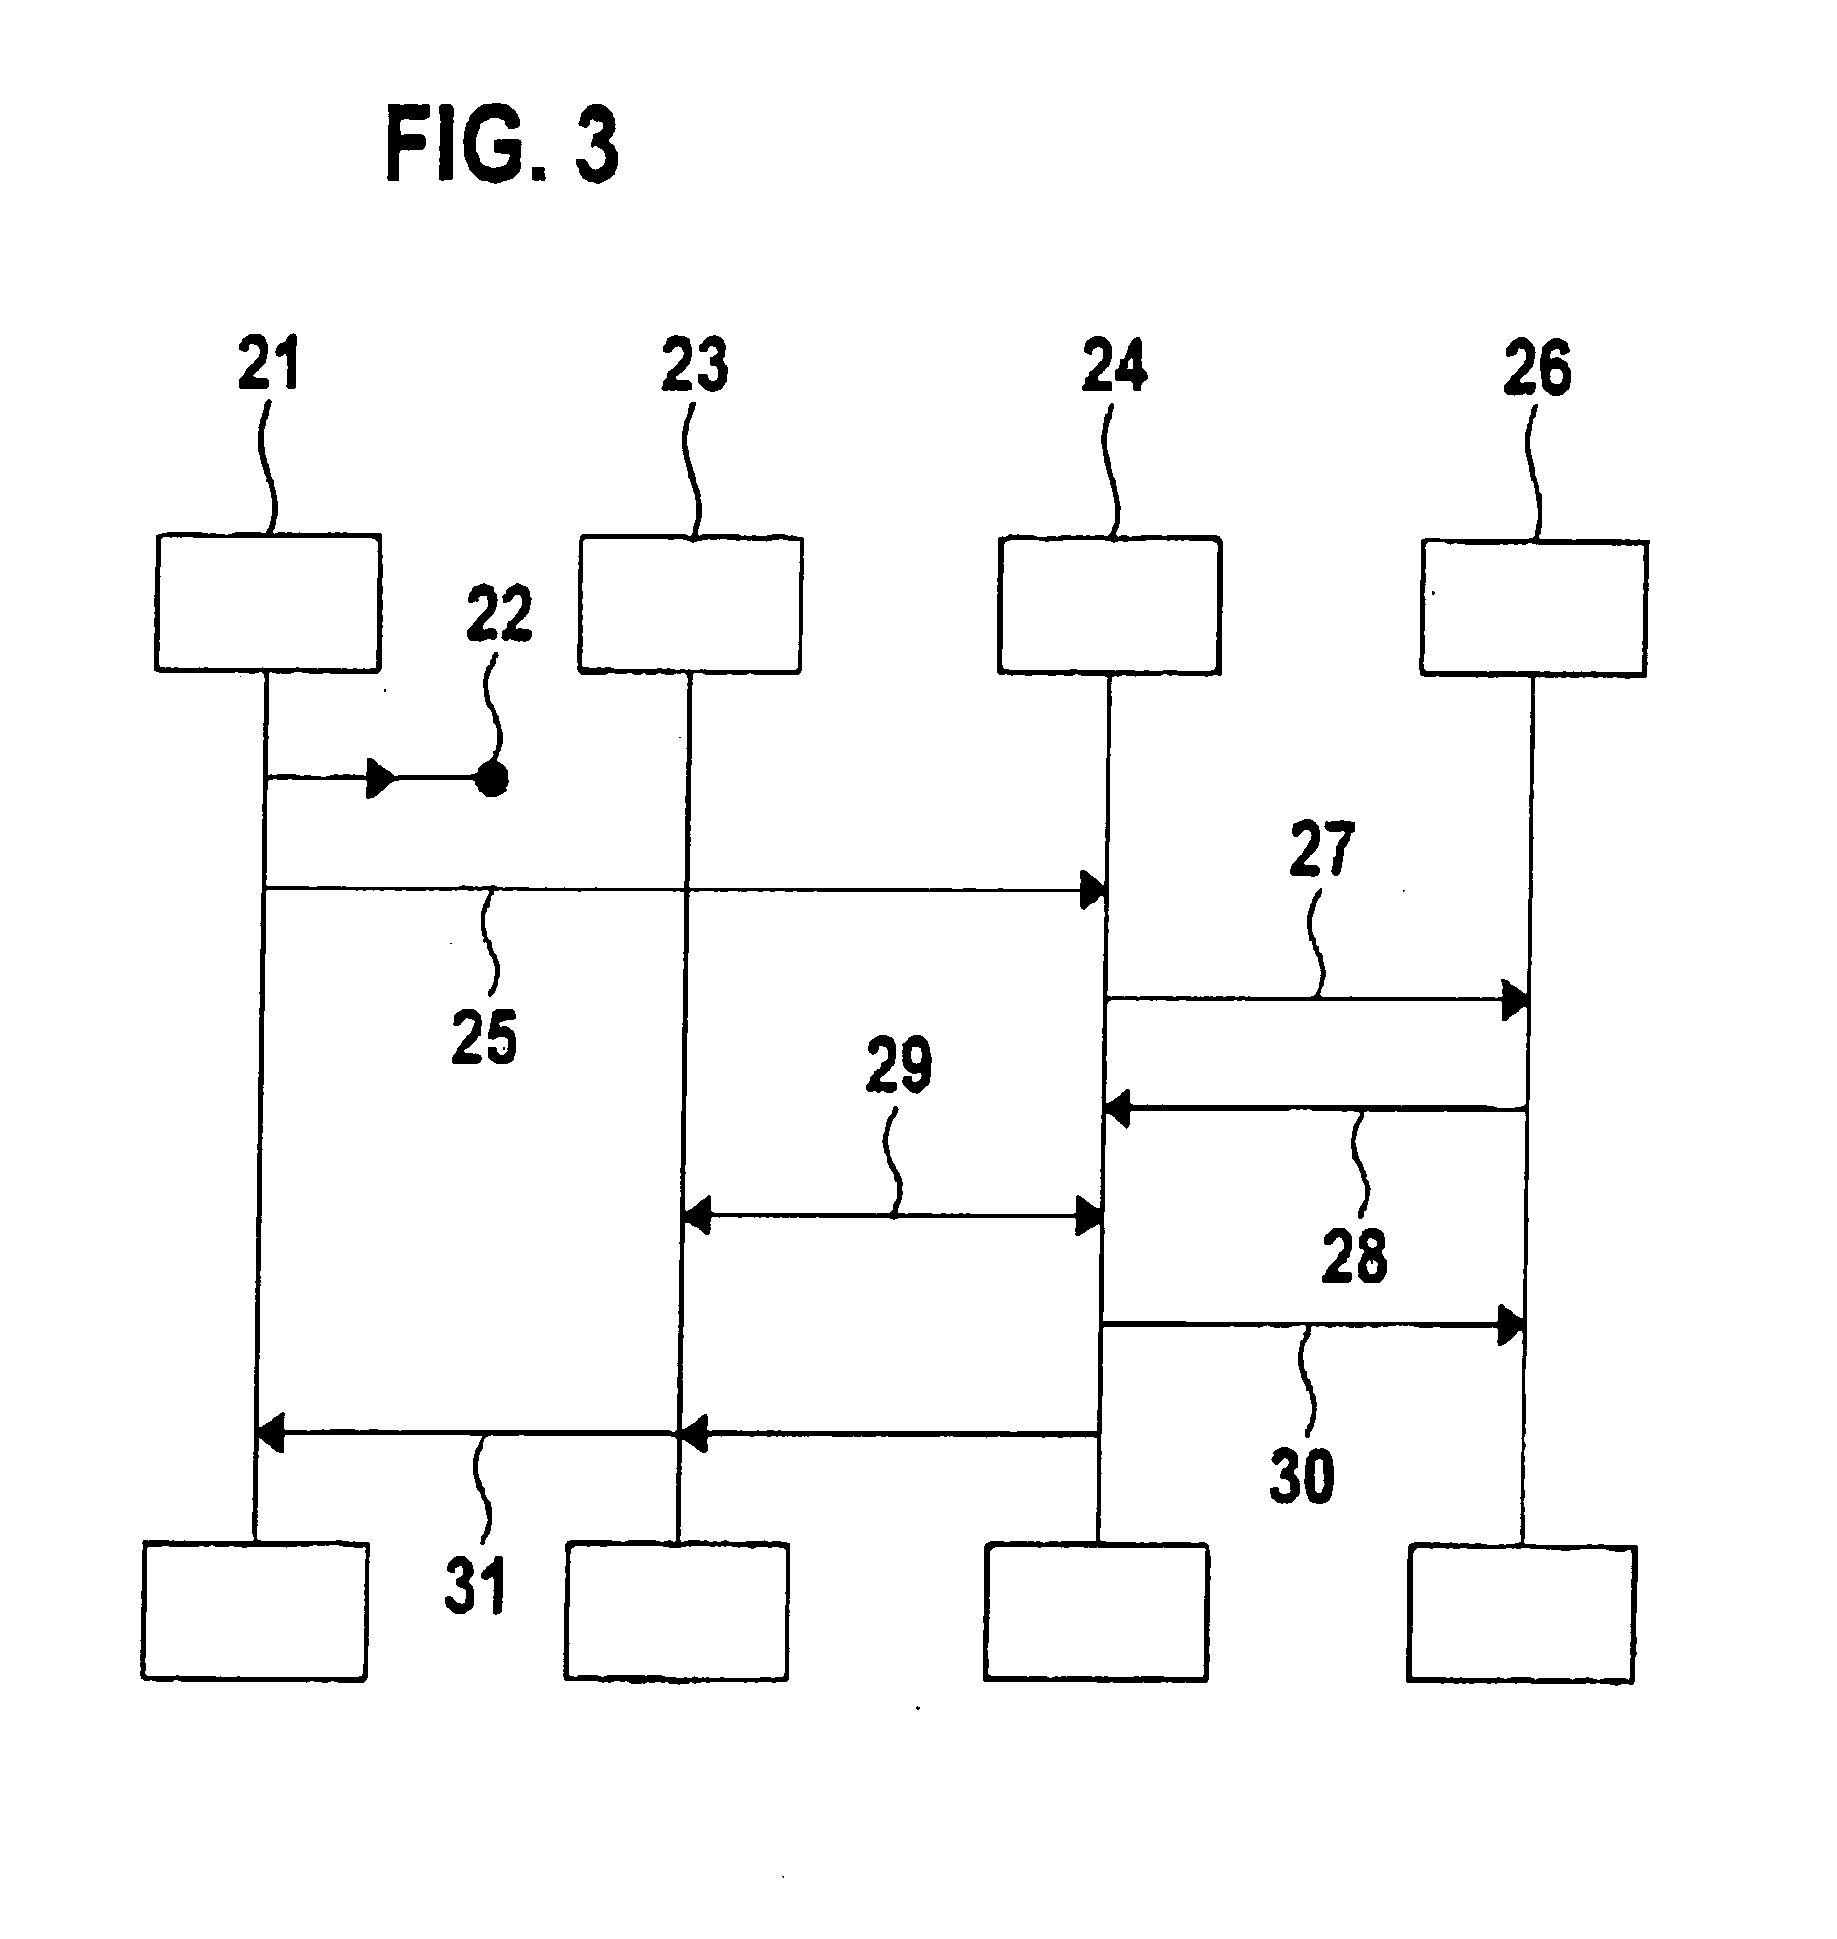 Method for treating a defective device in a vehicle communications network